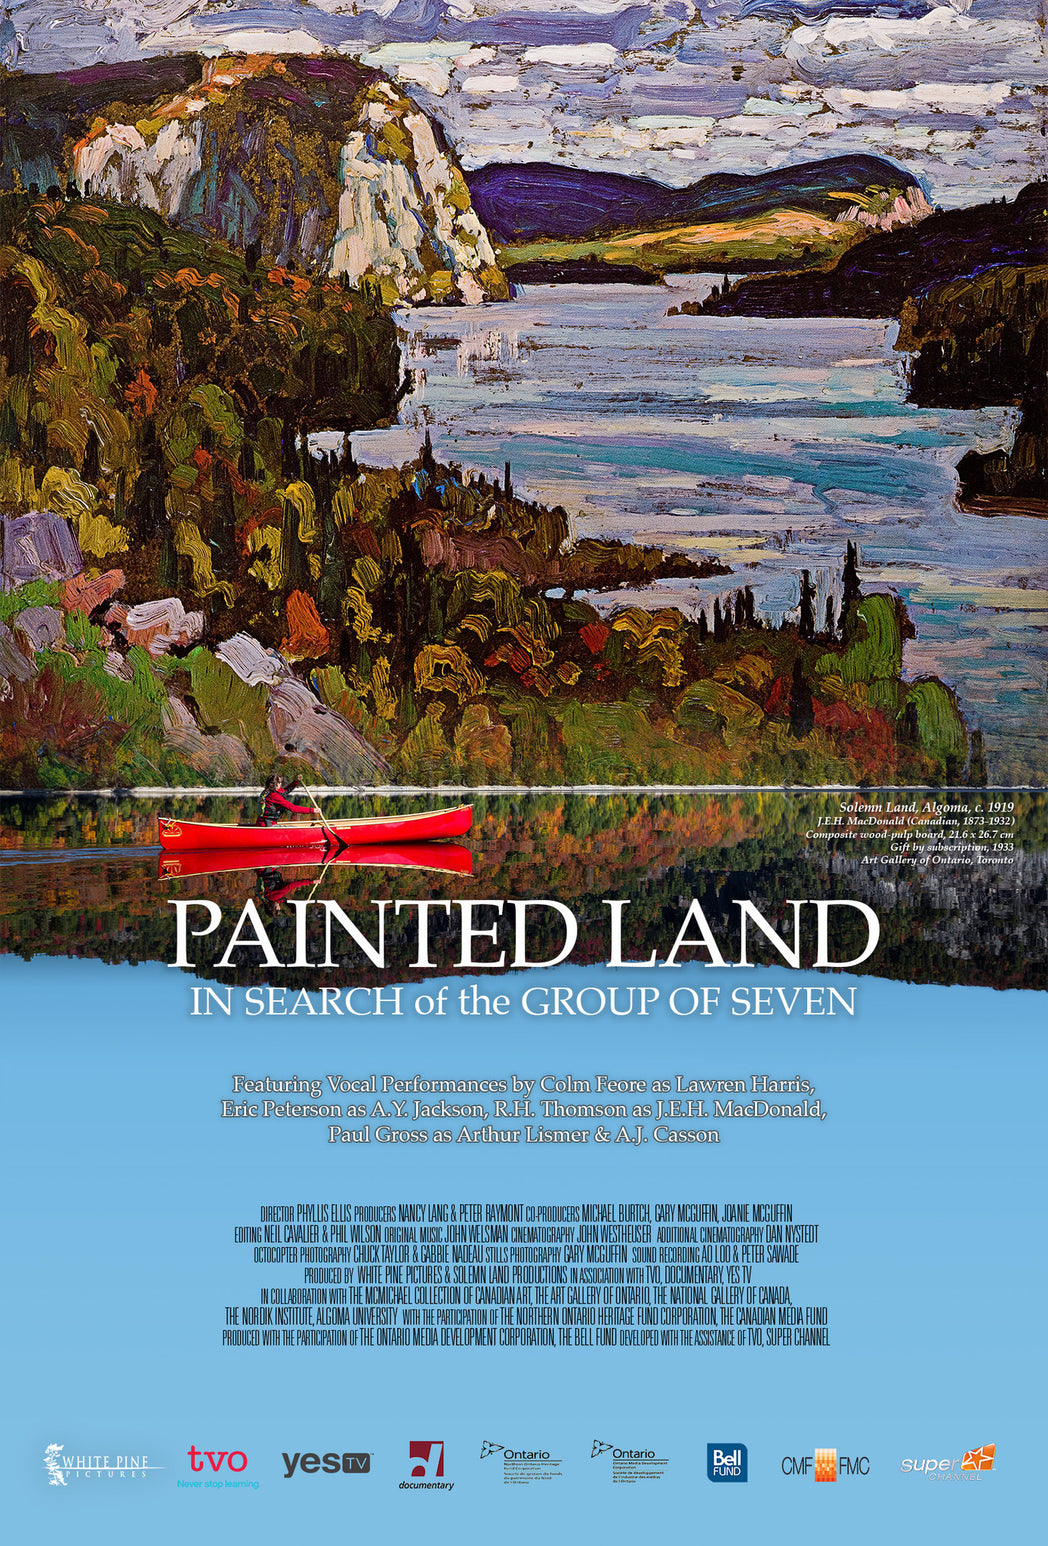 Painted Land: In Search of the Group of Seven - DVD